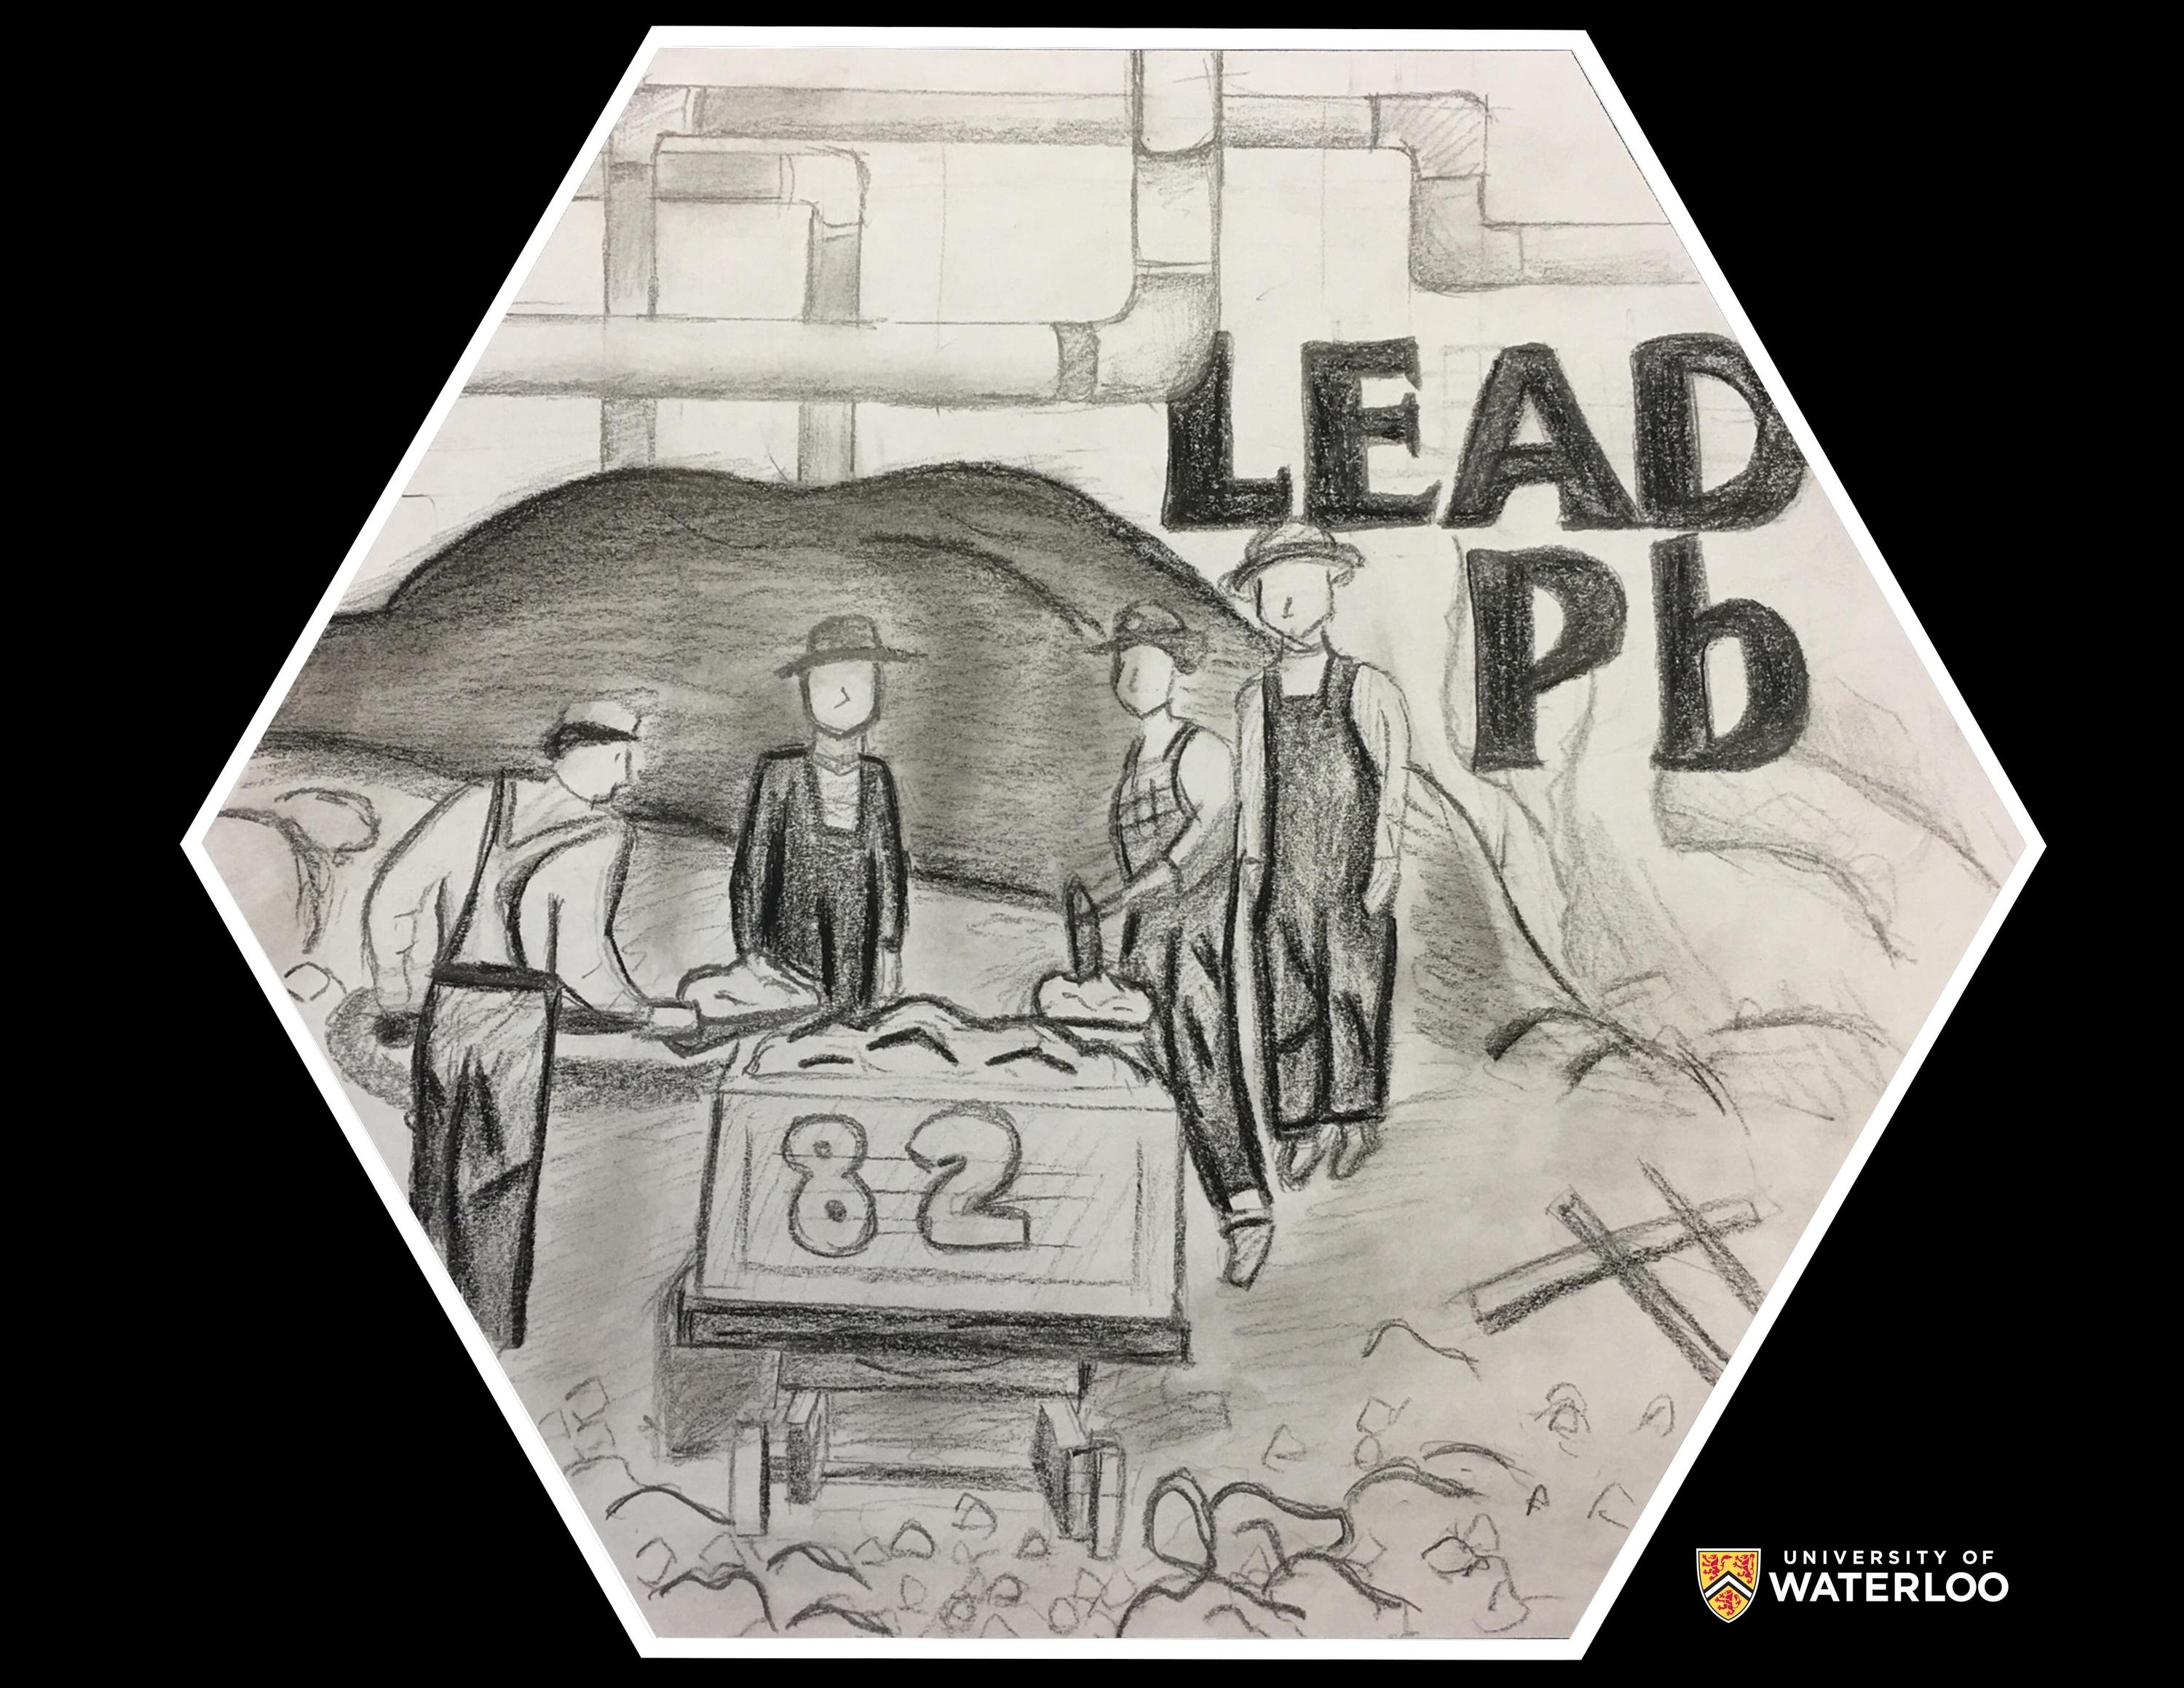 Pencil on white paper. Centre shows four miners surrounding a mining cart with “82” on it. Above are plumbing pipes made using lead as well as “Lead” with the chemical symbol “Pb” below.